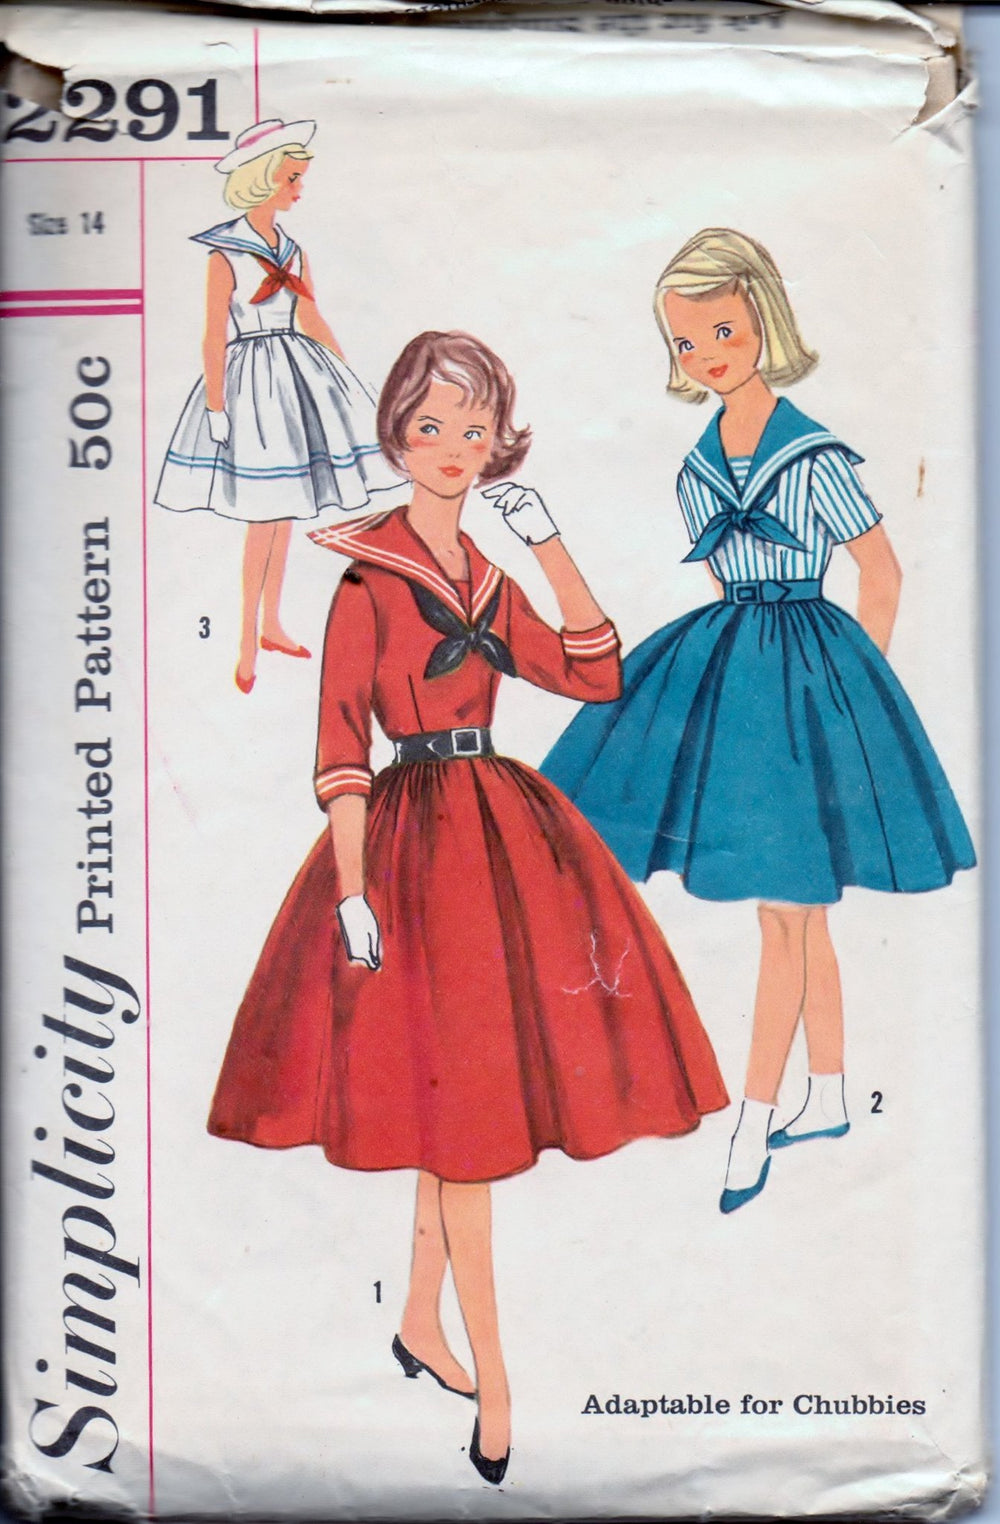 Simplicity 2291 Young Girls Sailor Middy Dress with Tie Vintage 1950's Sewing Pattern - VintageStitching - Vintage Sewing Patterns